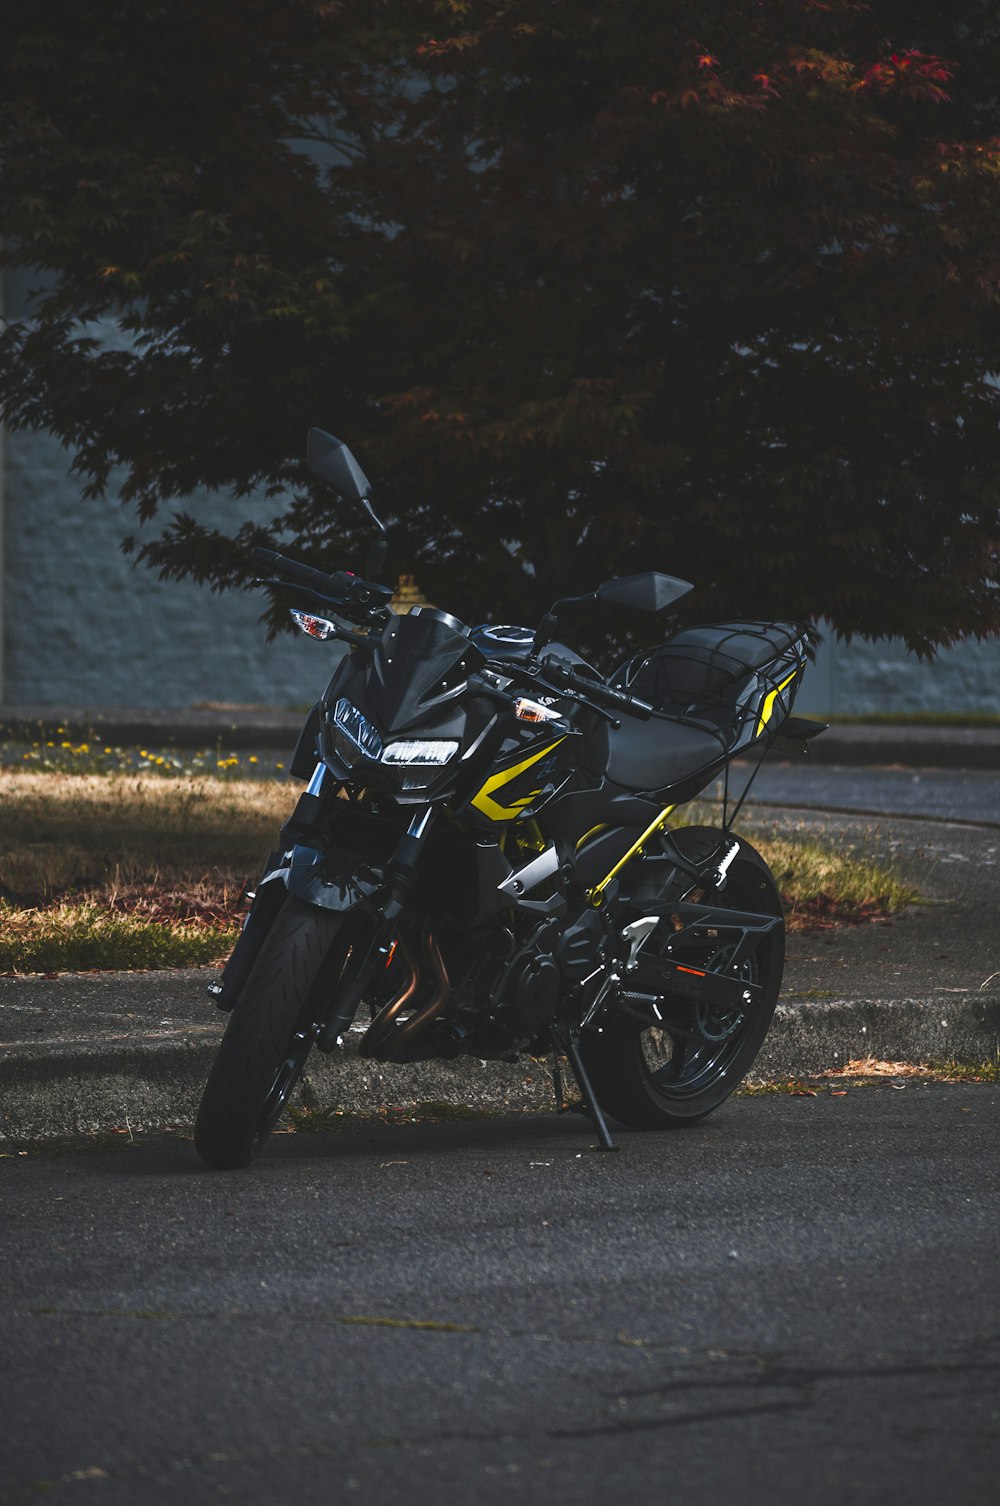 black and yellow motorcycle on road during daytime